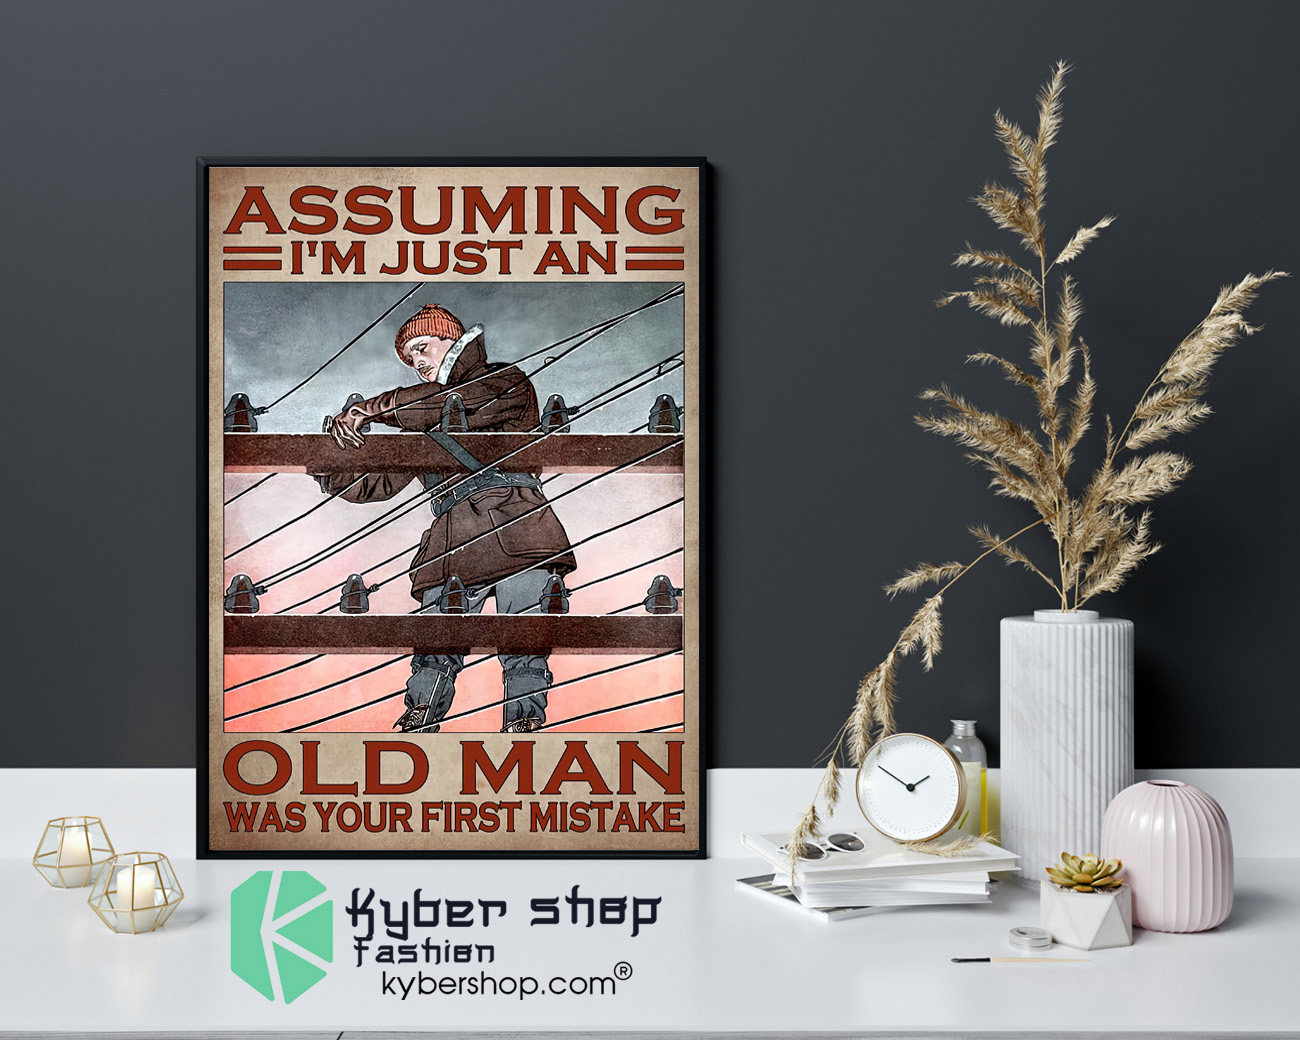 Lineman Assuming im just an old man was your first mistake poster 4